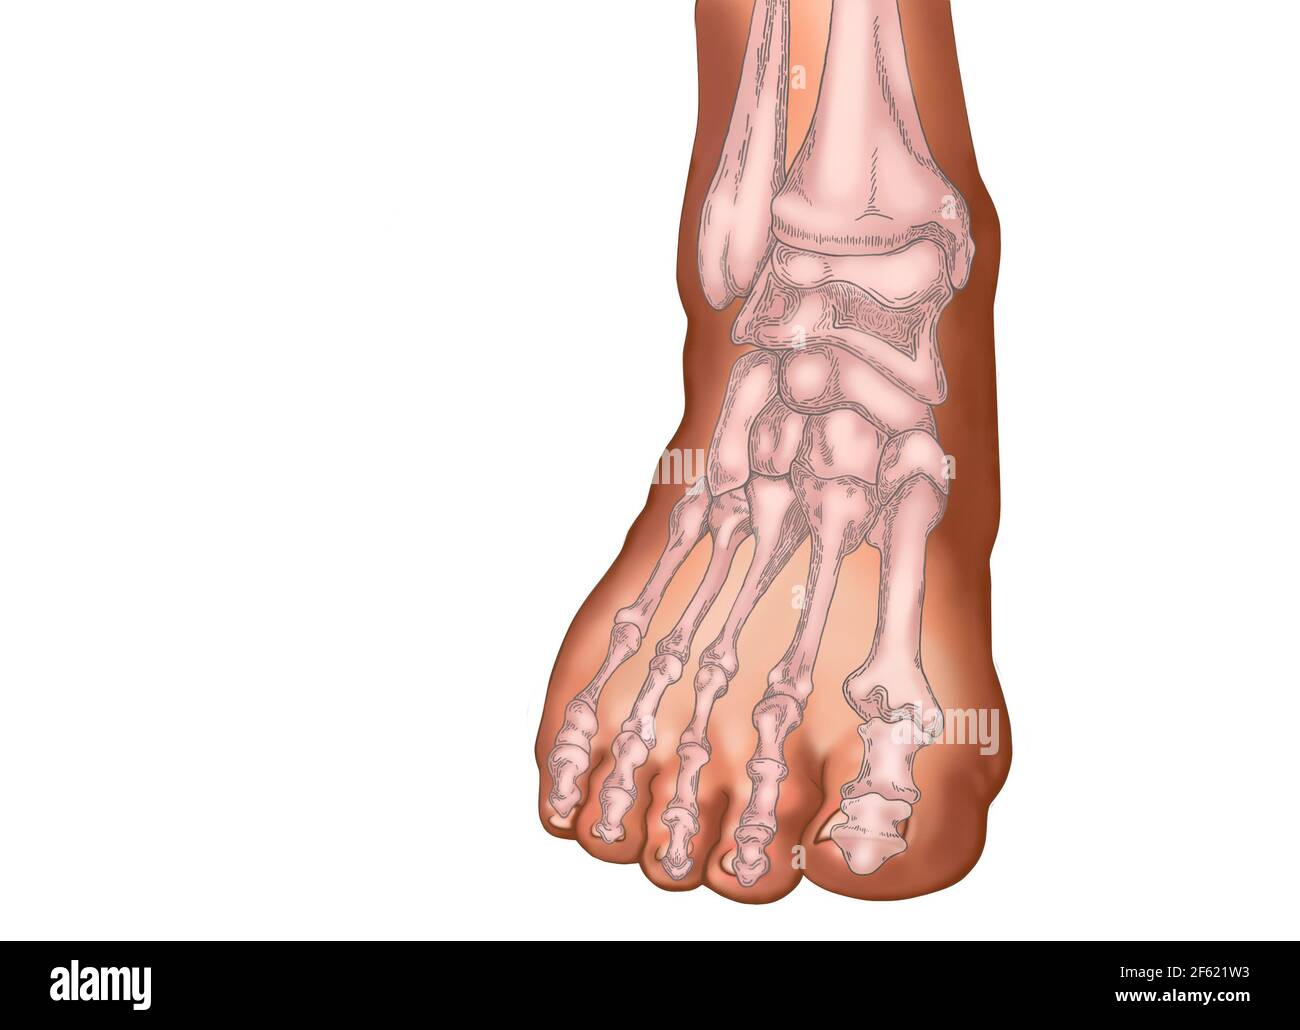 Skeleton of the Foot Stock Photo